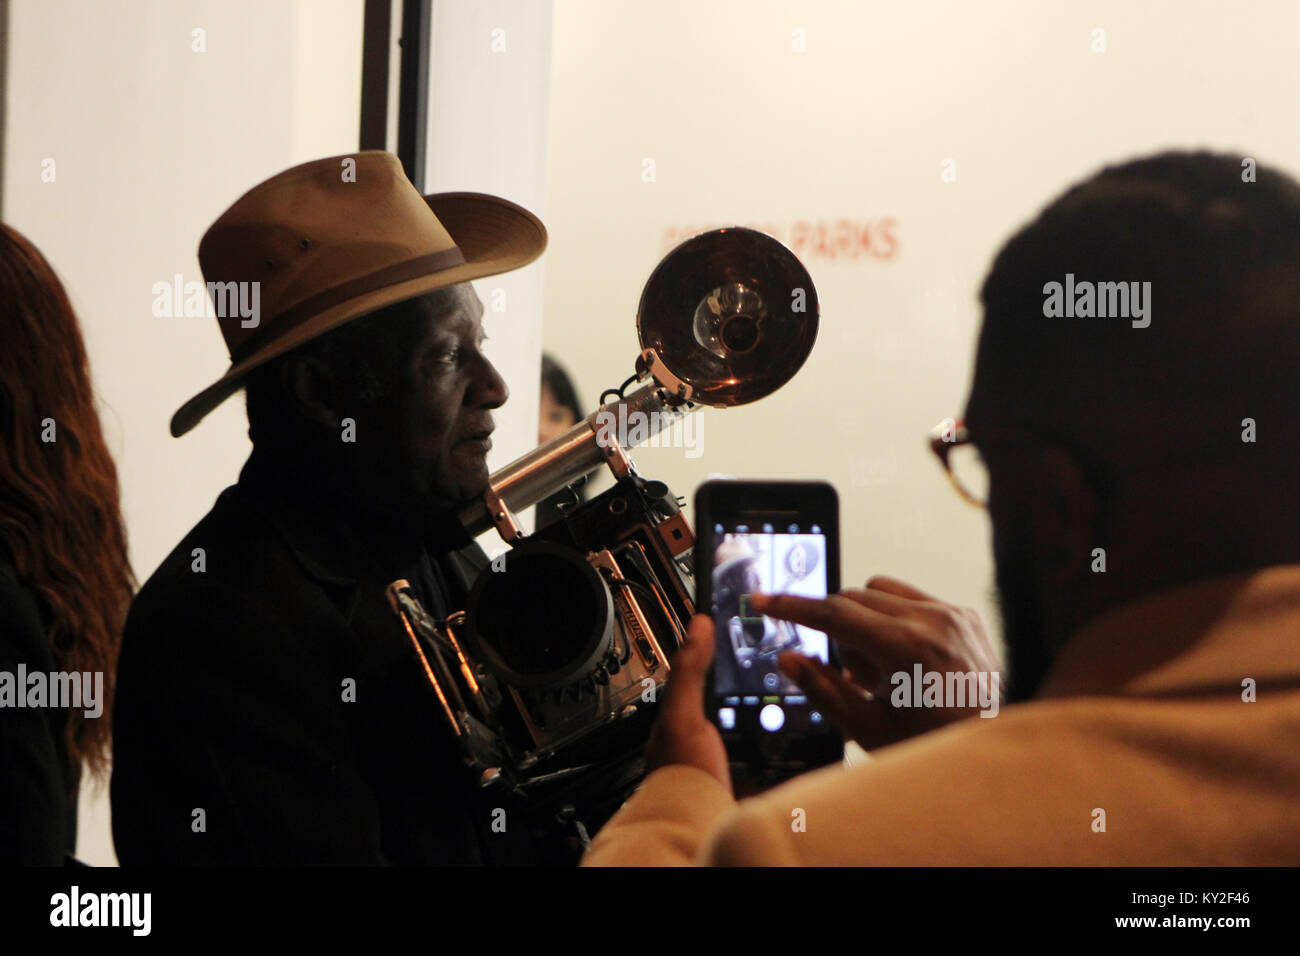 New York, NY, USA. 11th Jan, 2018. Photographer Louis Mendes attends the Gordon Parks: I AM YOU Opening Reception presented by the Gordon Parks Foundation held at the Jack Shanmain Gallery on January 11, 2018 in New York City. Credit: Mpi43/Media Punch/Alamy Live News Stock Photo